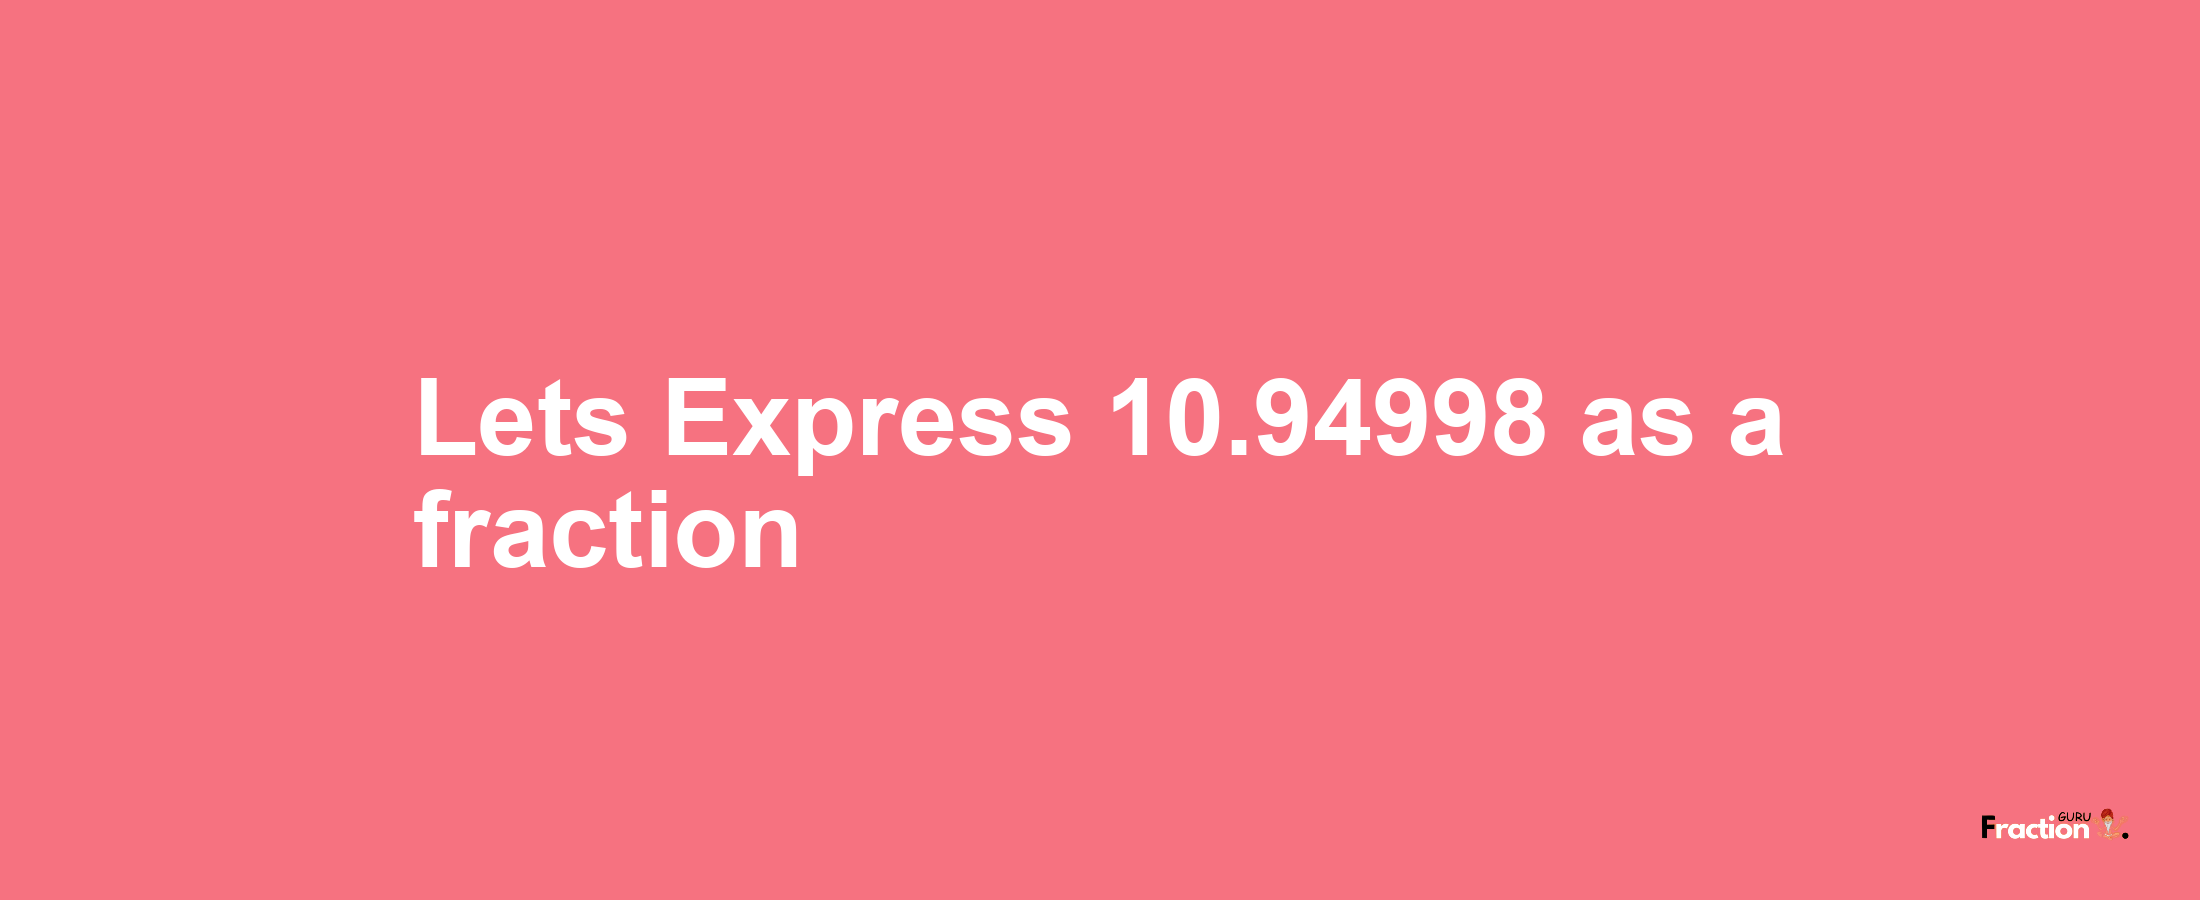 Lets Express 10.94998 as afraction